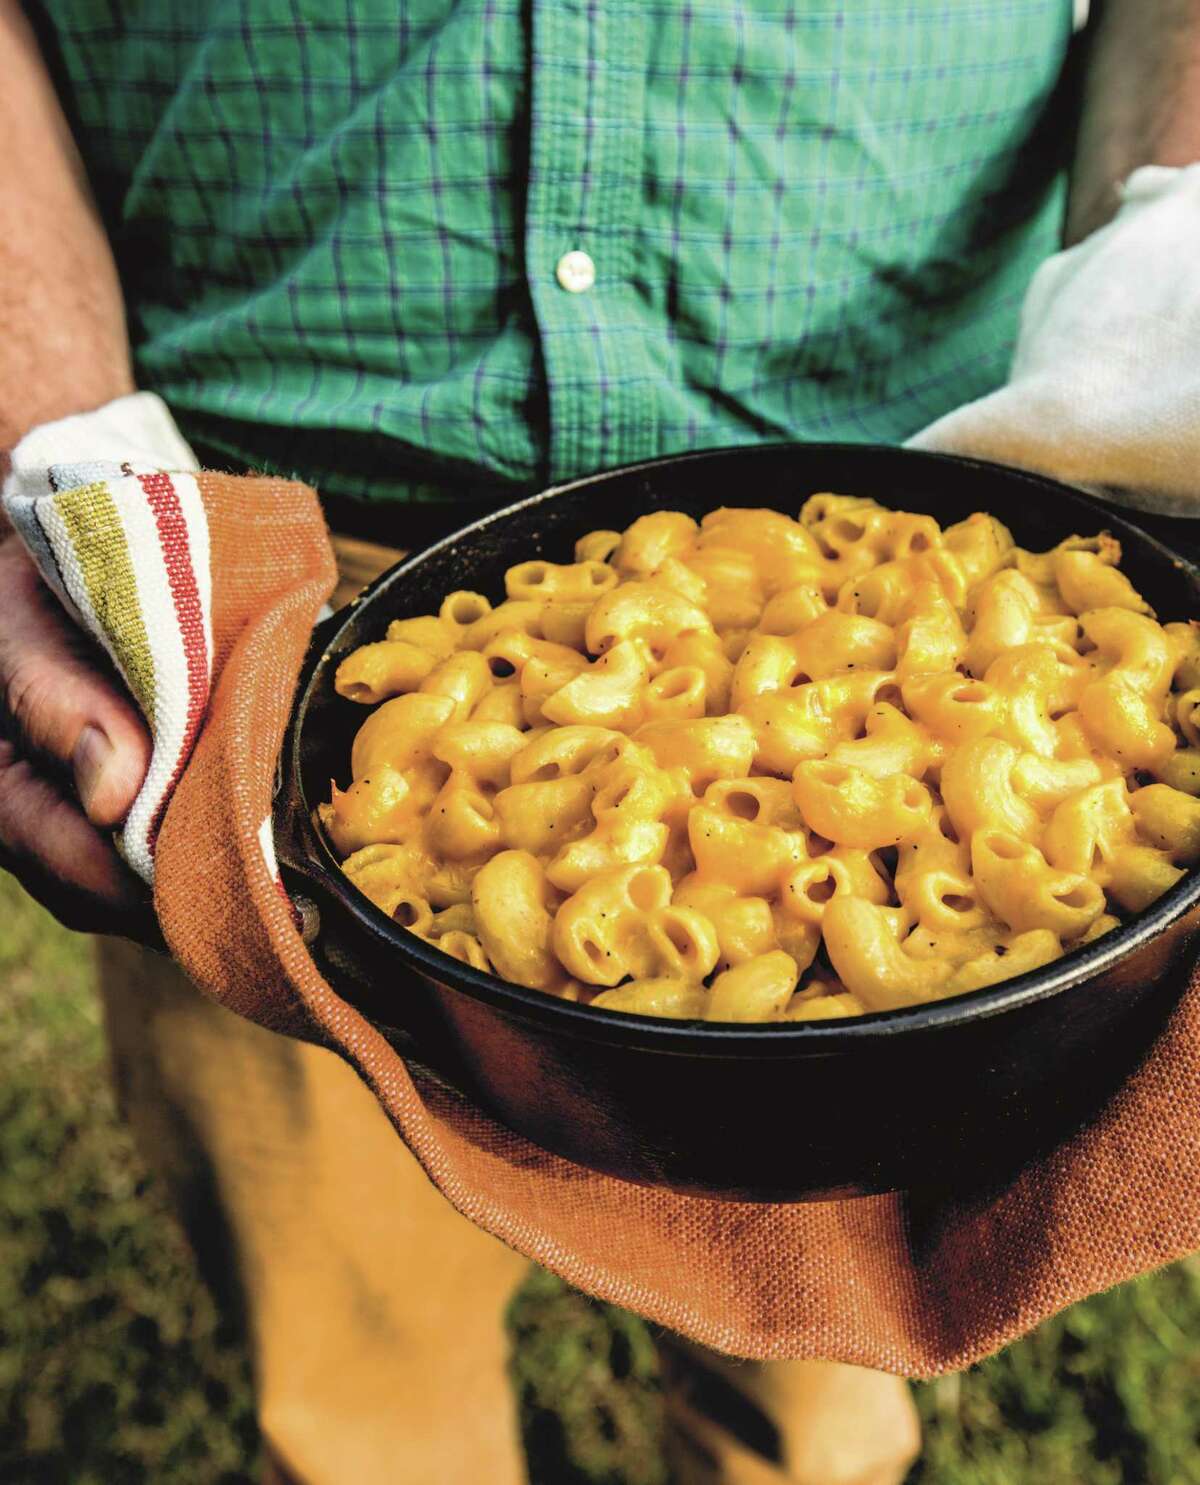 Macaroni and cheese from "Rodney Scott's World of BBQ" by Rodney Scott and Lolis Eric Elie.